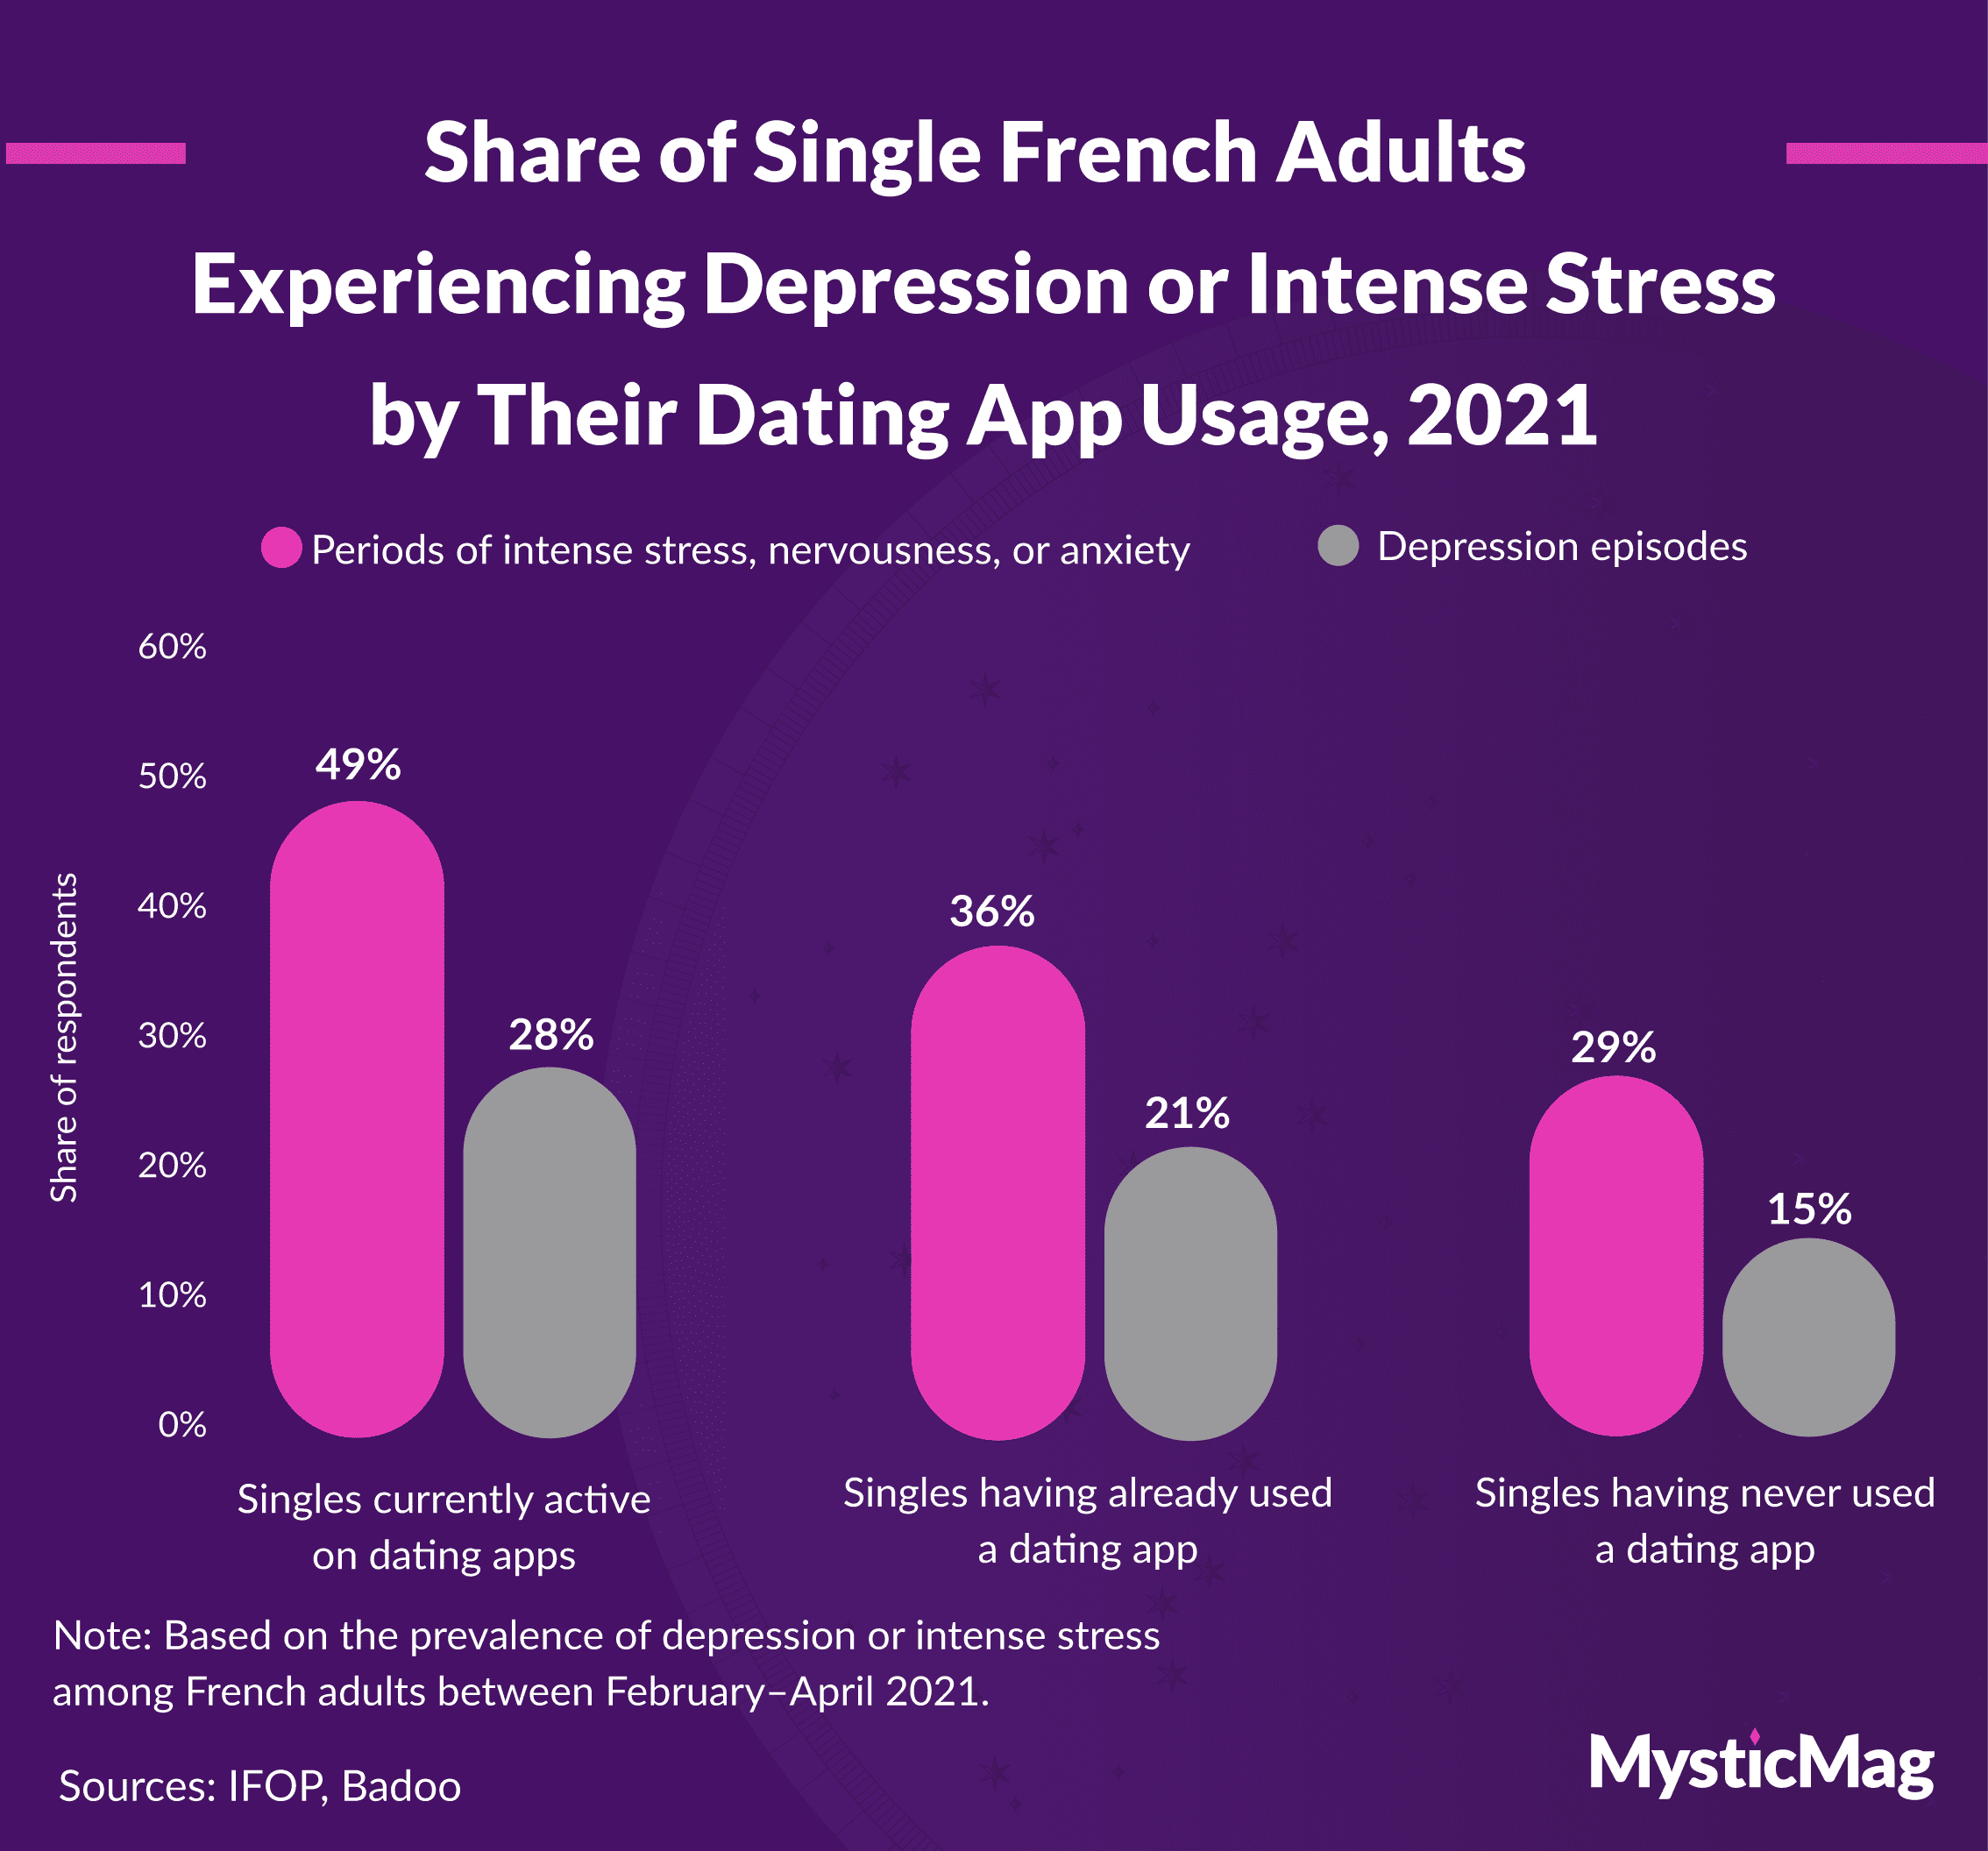 Anxiety or stress symptoms by dating app usage, 2021